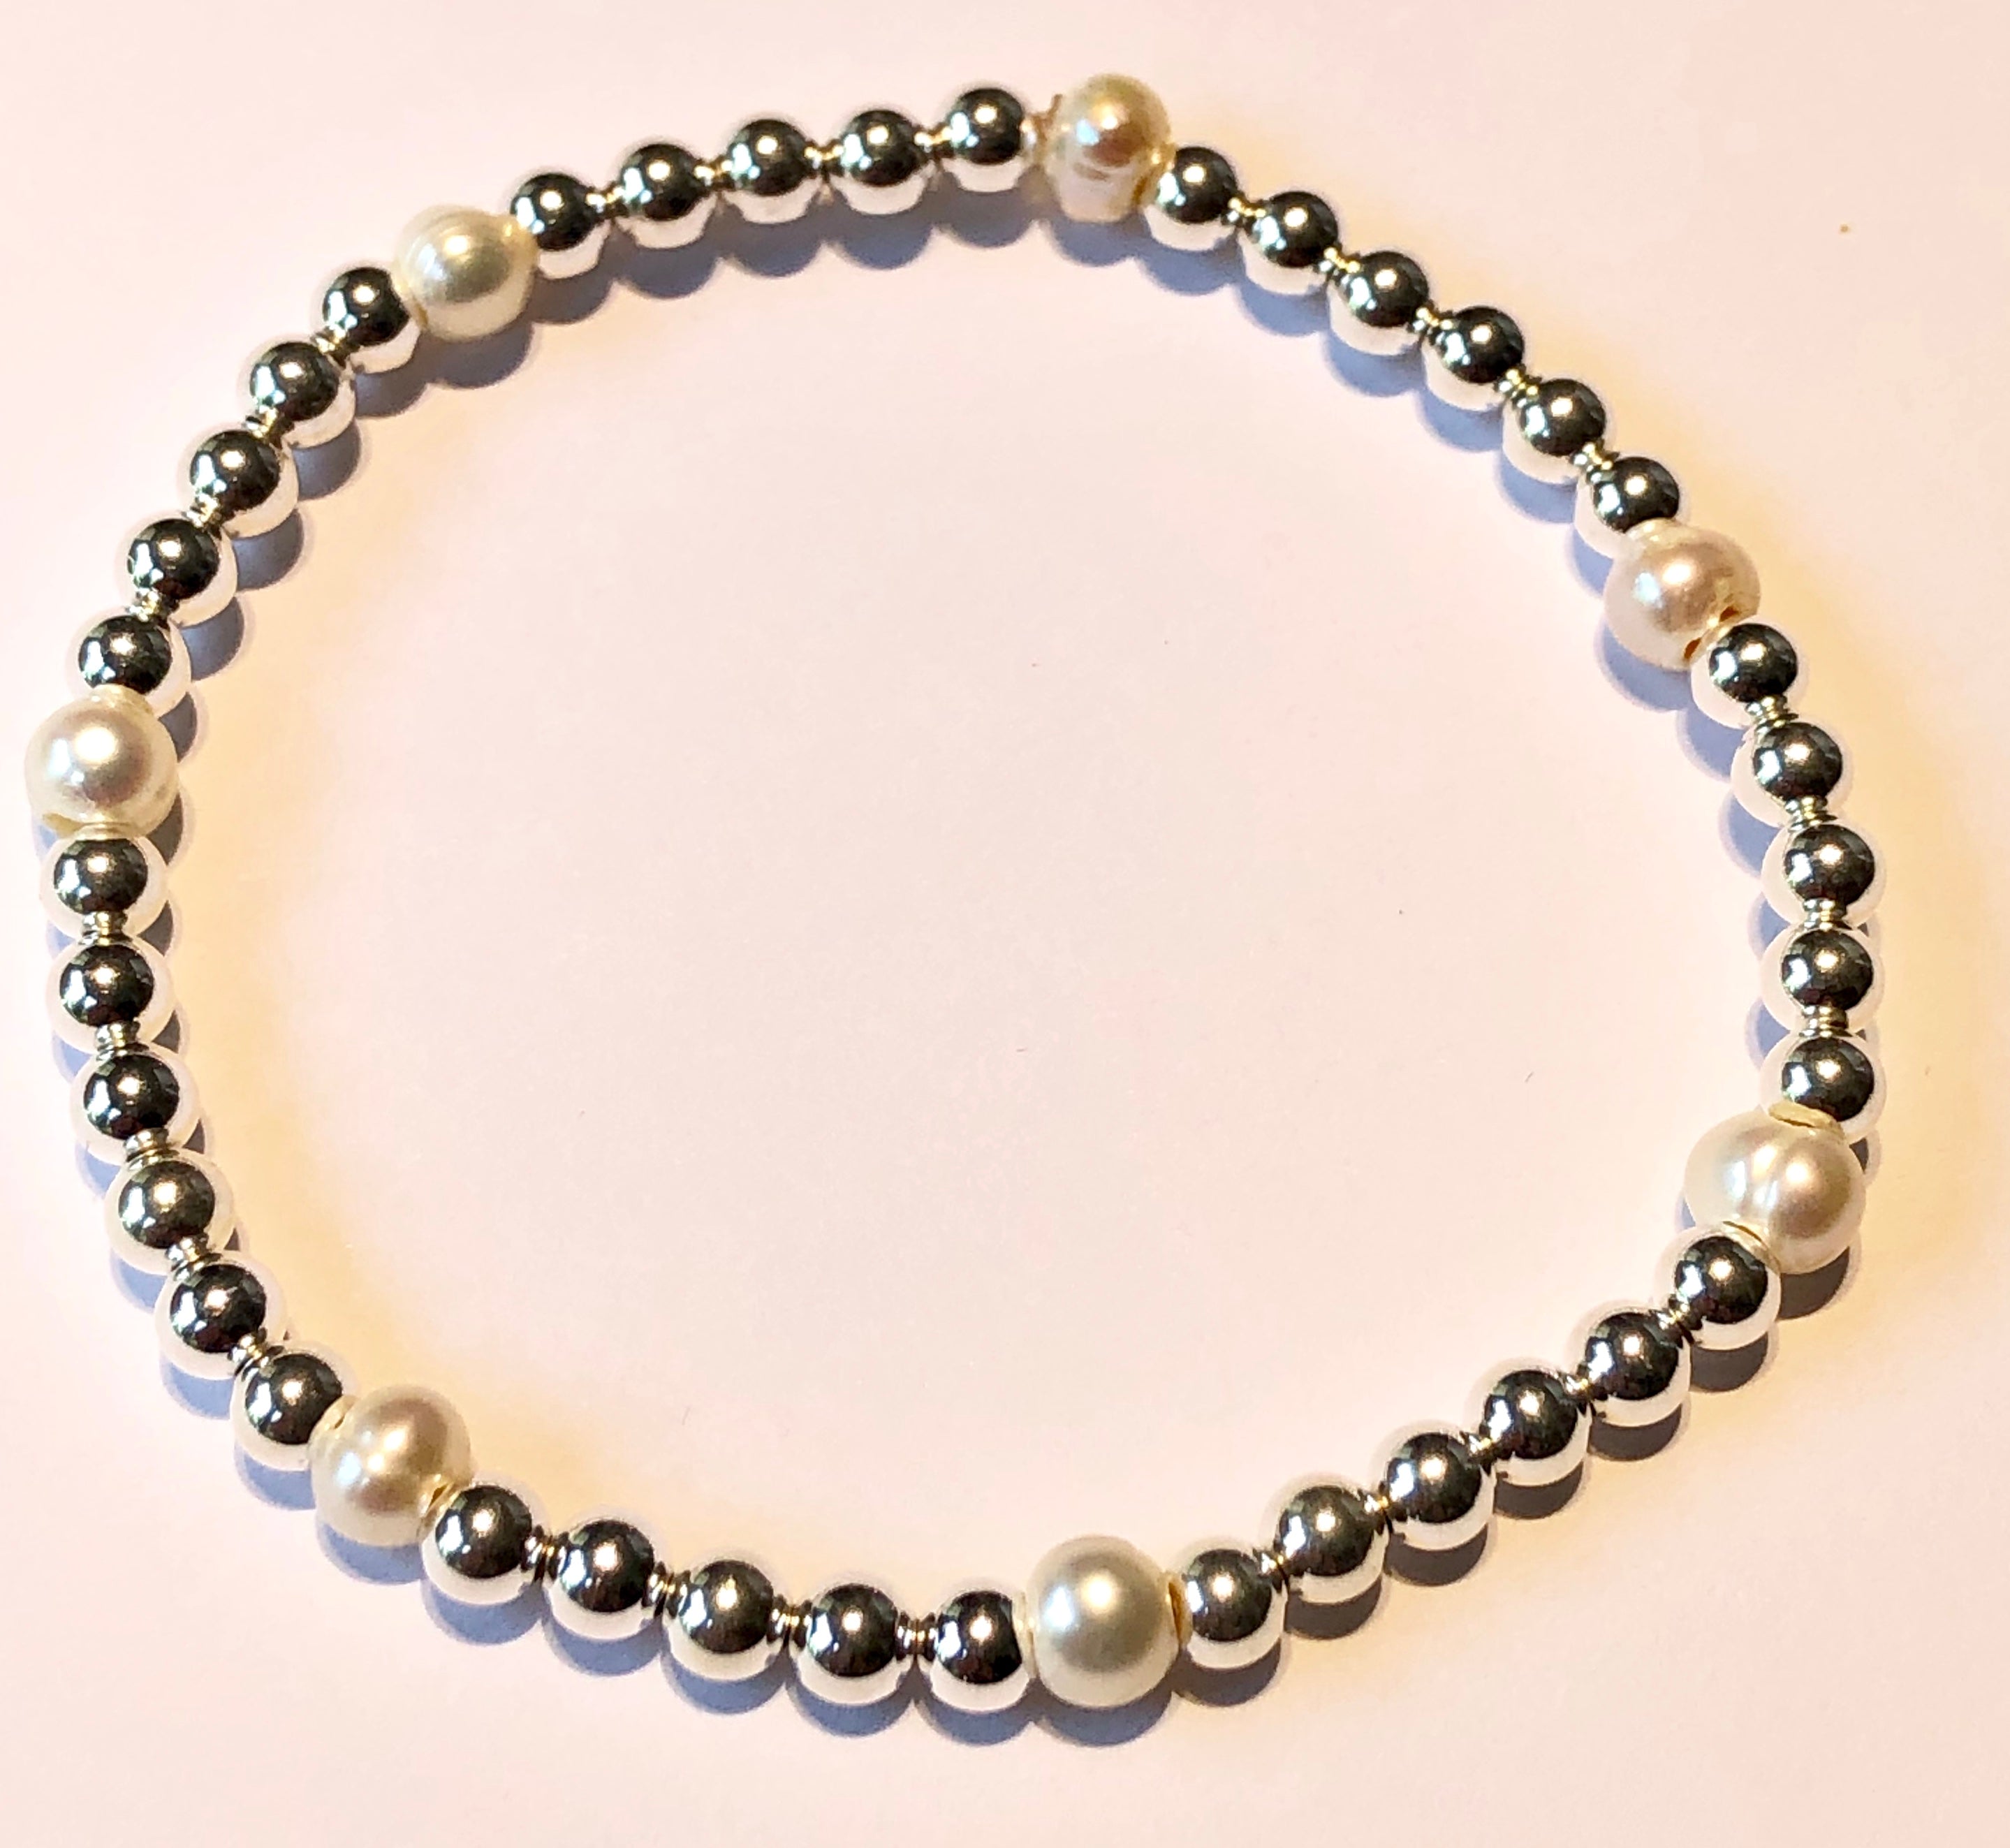 4mm Sterling Silver Bead Bracelet with 3 Fresh Water Pearls